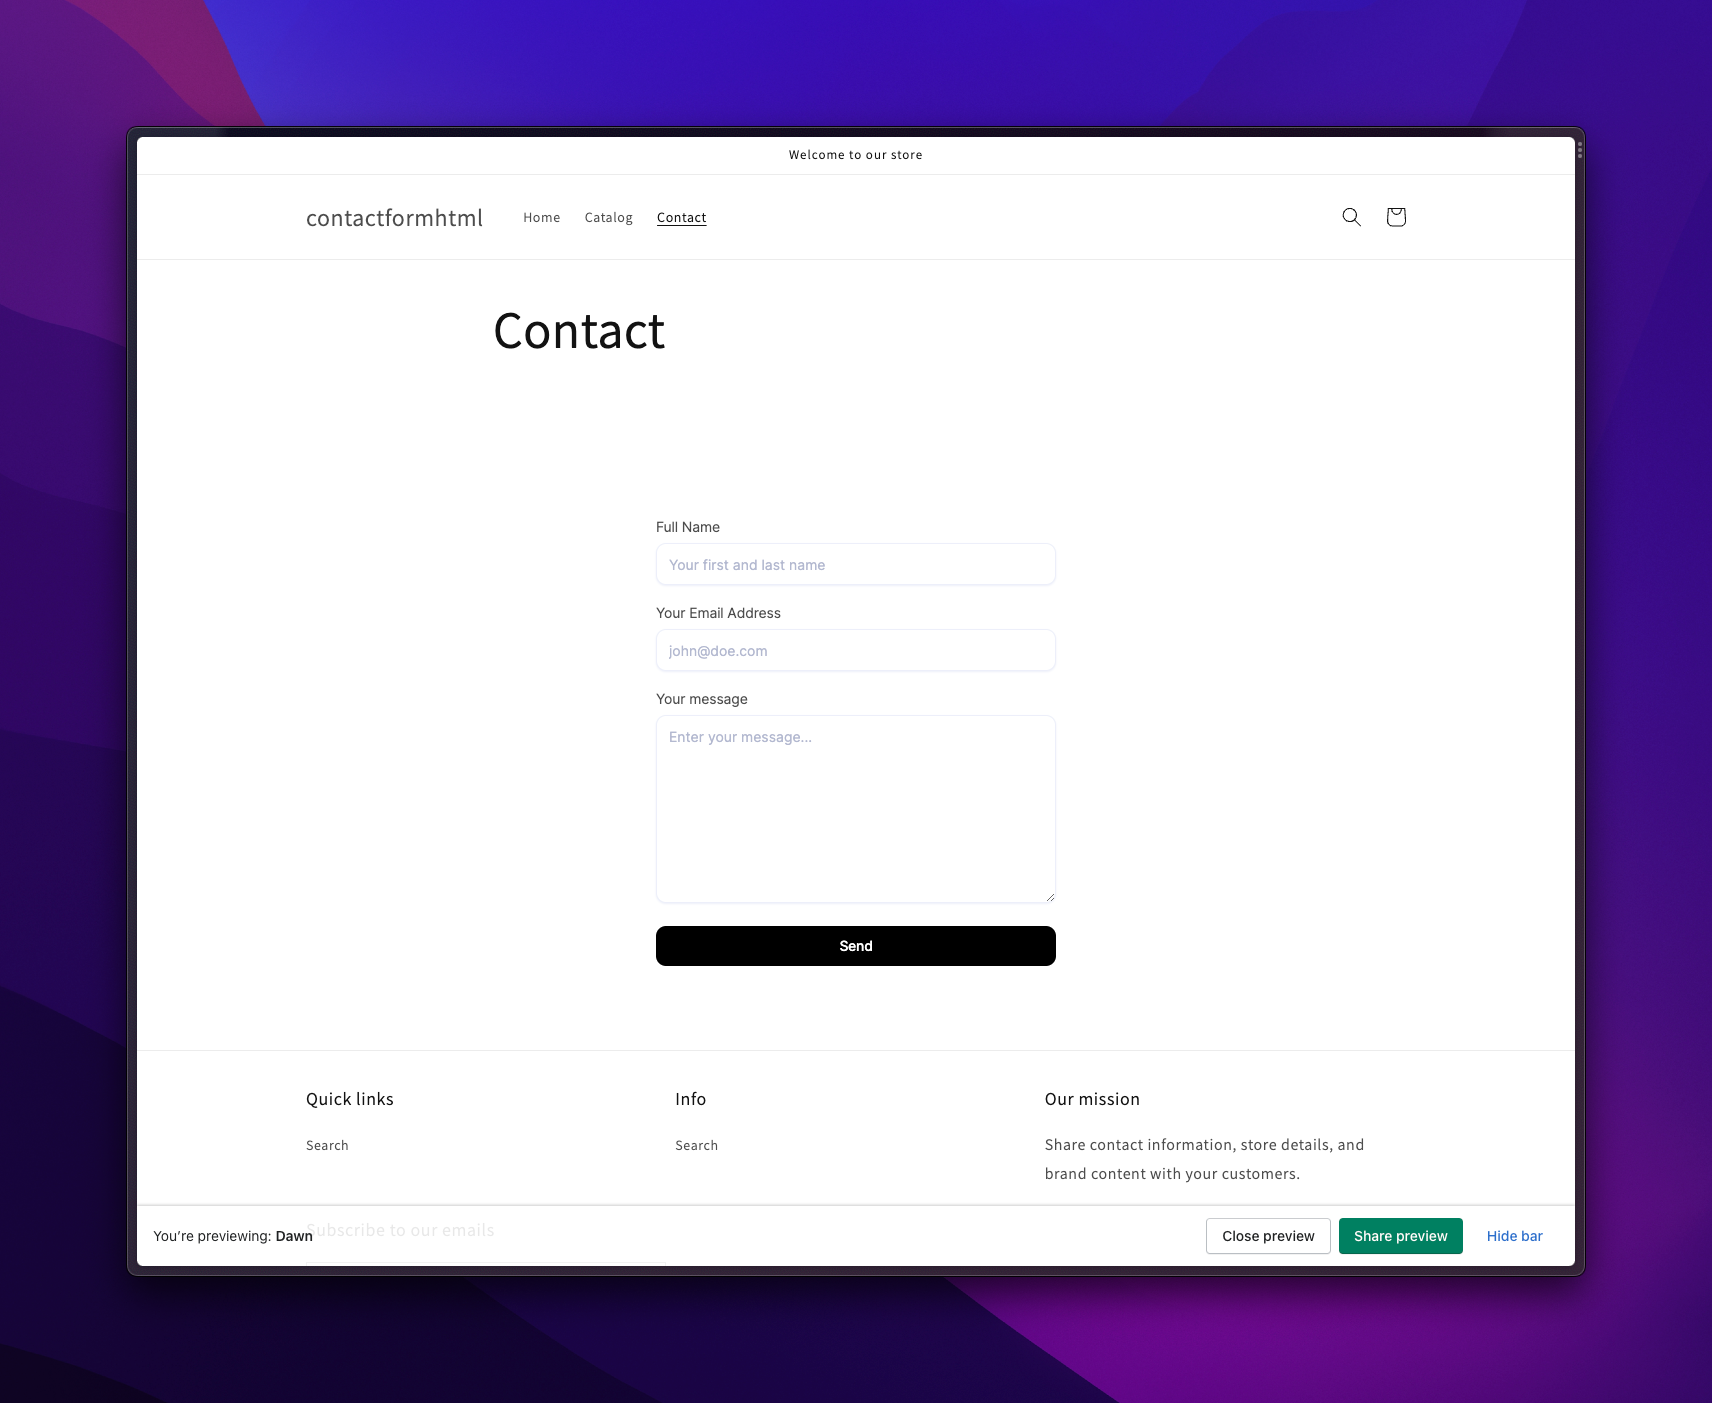 How to add a contact form to your Shopify website: Step-by-step guide